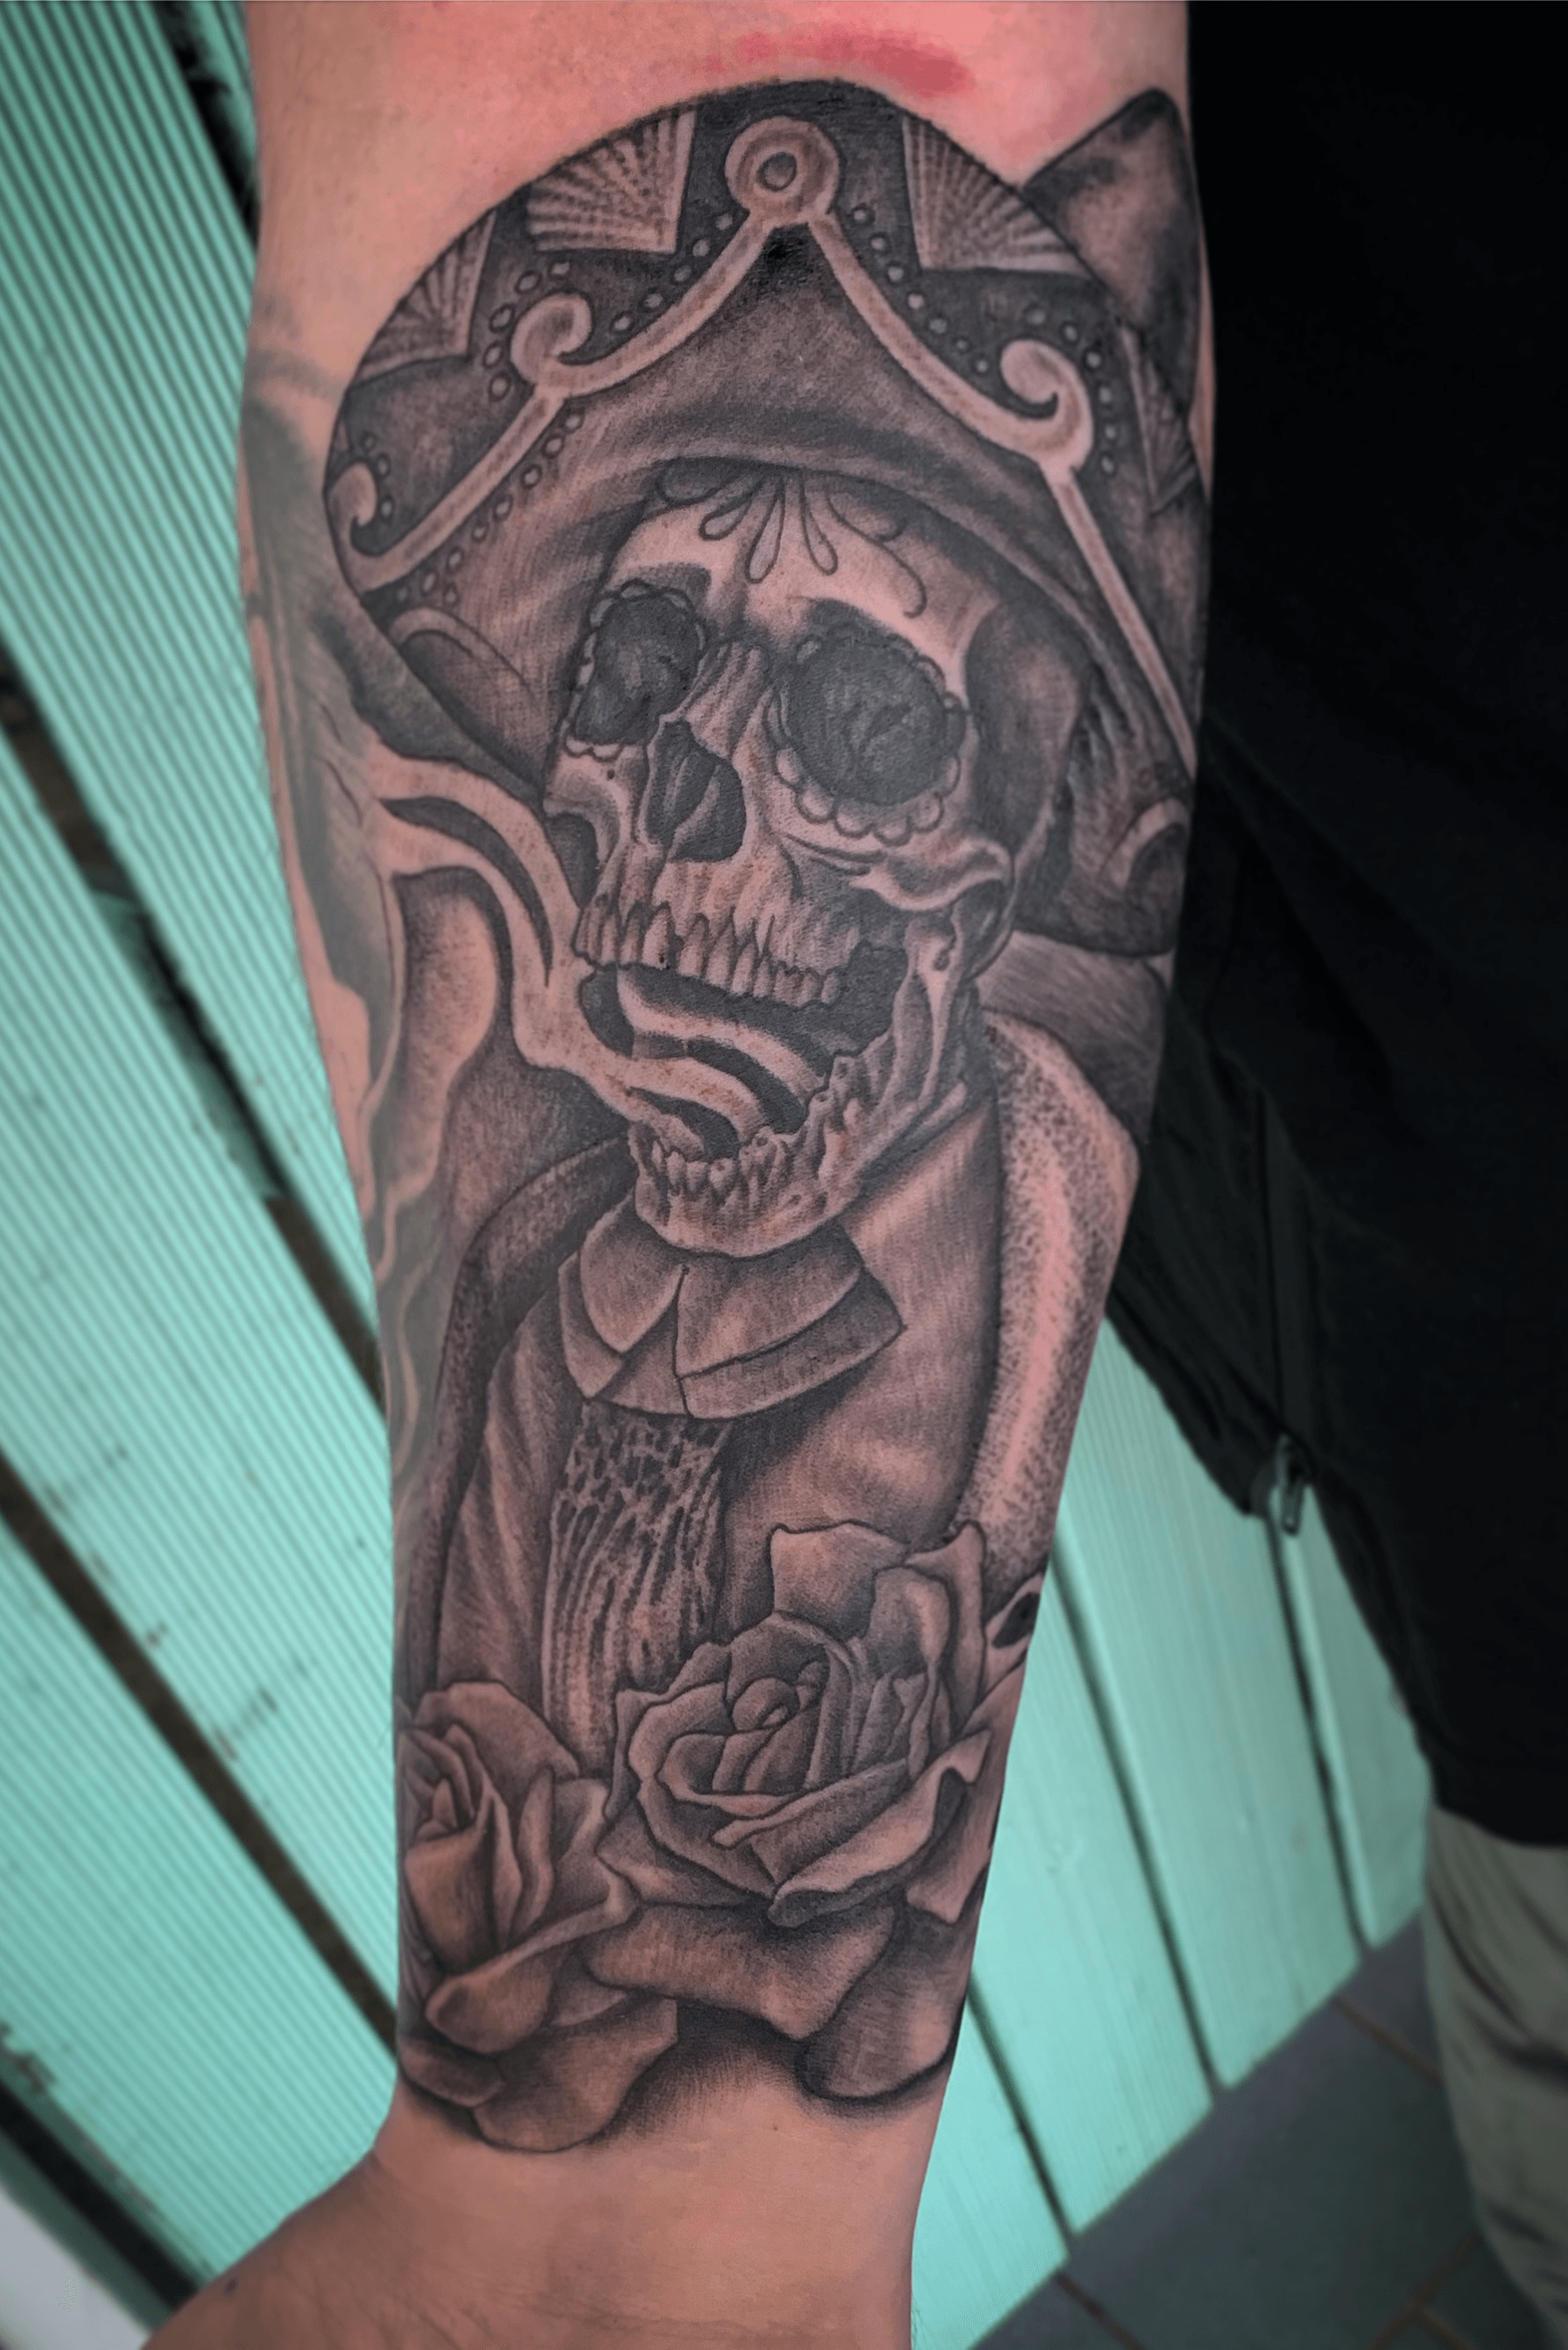 Day of the Dead Mariachi Tattoo by DesertDahlia on DeviantArt